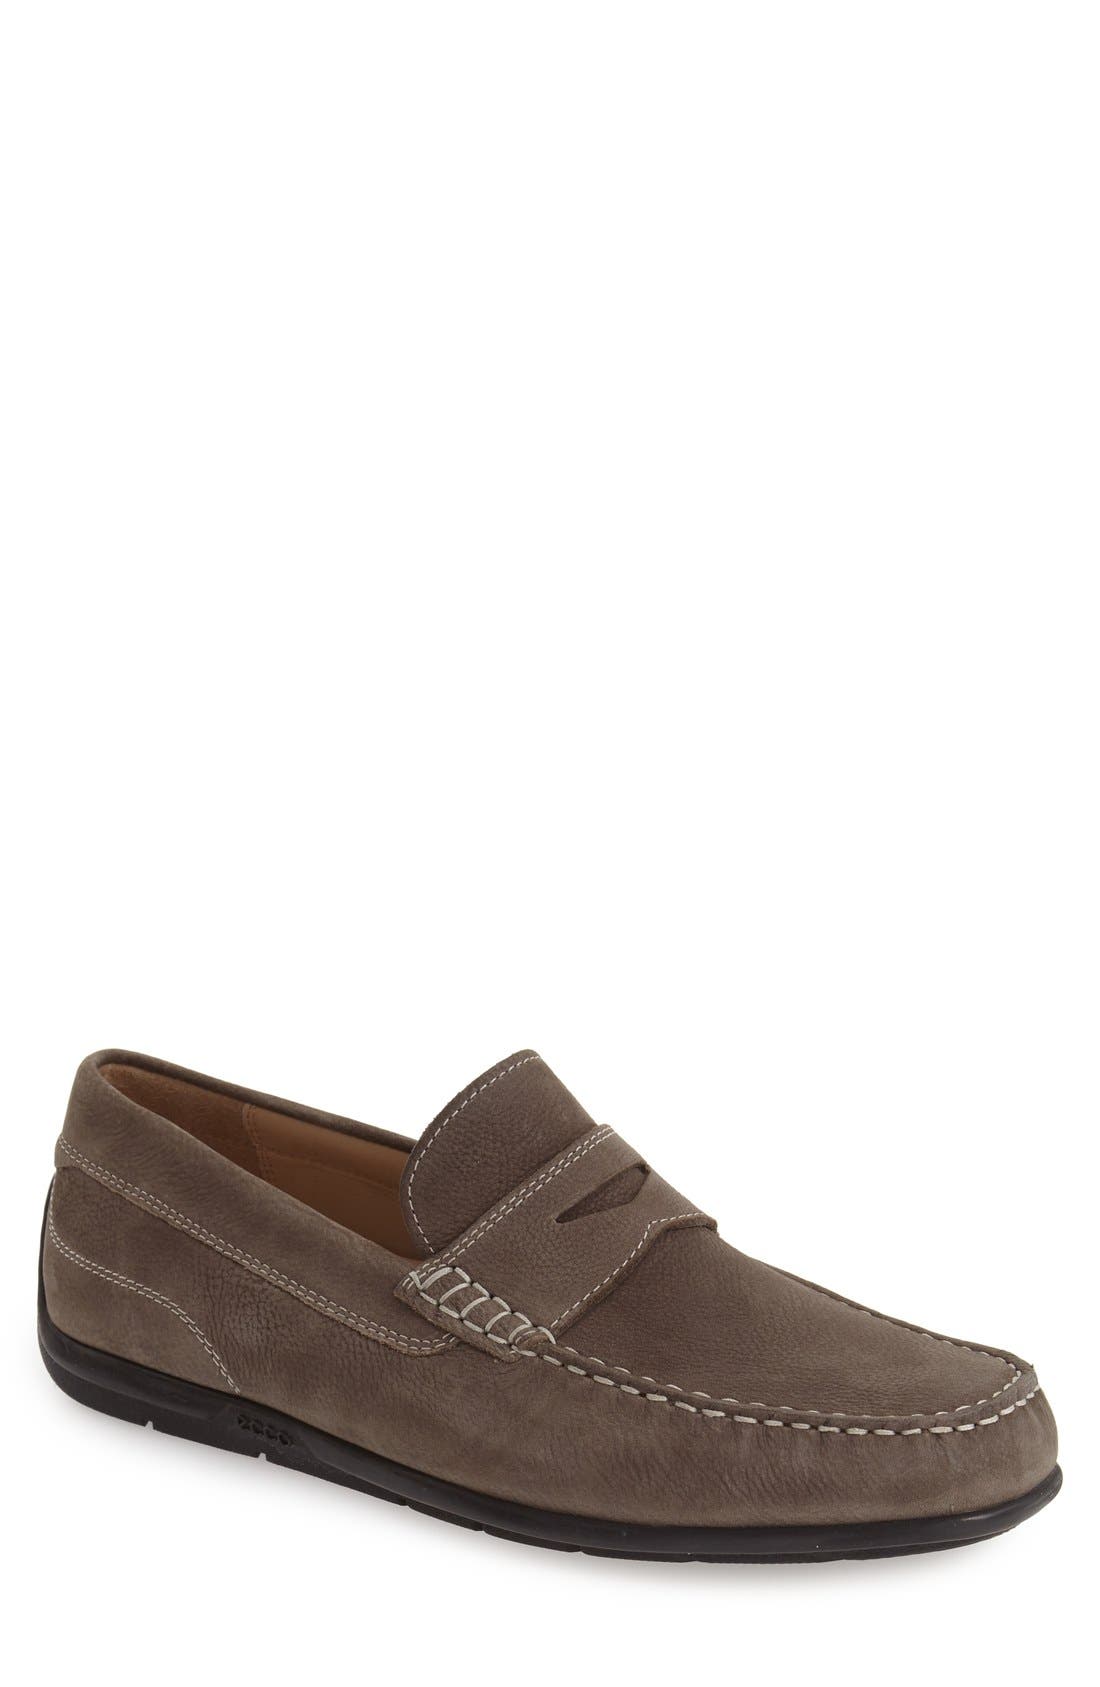 ECCO 'Classic Moc 2.0' Penny Loafer 